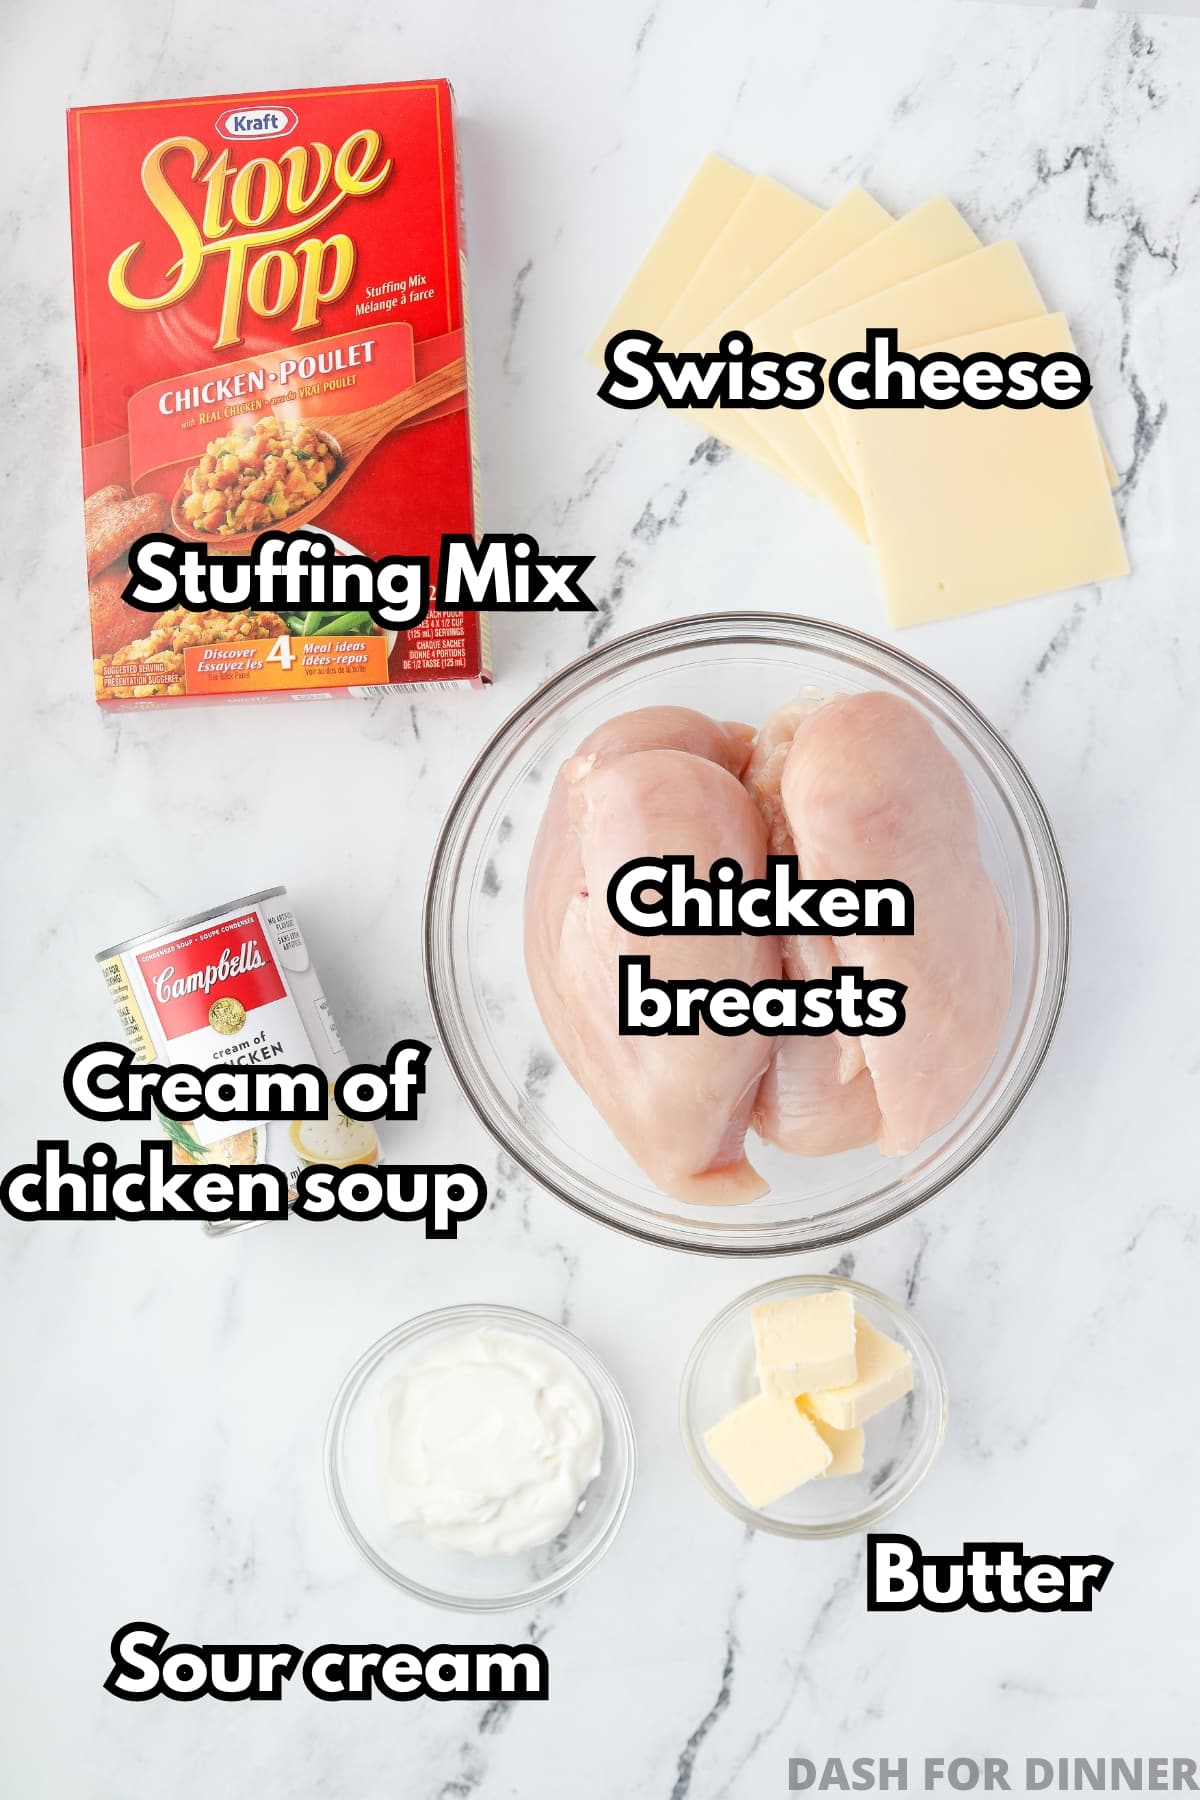 The ingredients needed to make chicken and stuffing: chicken breasts, cream of chicken soup, stuffing mix, butter, swiss cheese, and sour cream.